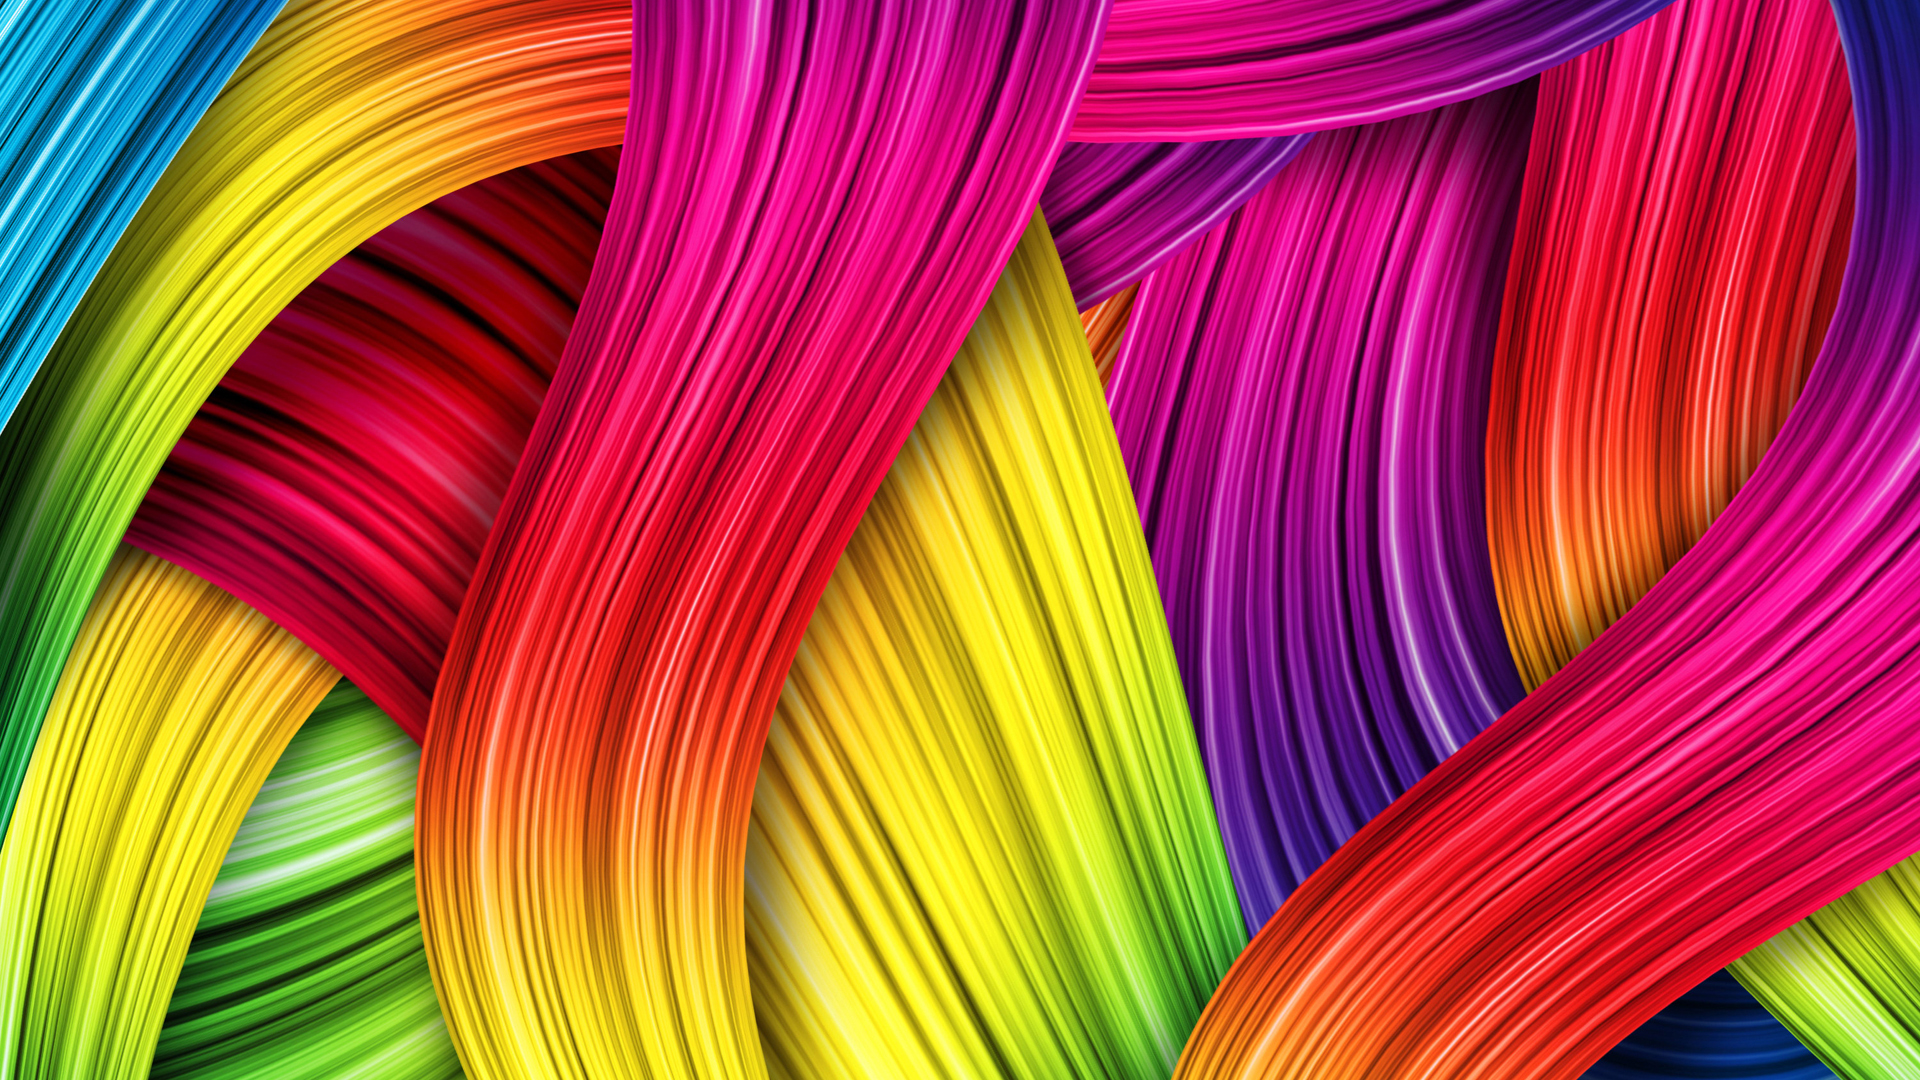 colorful abstract hd desktop wallpaper download this wallpaper for